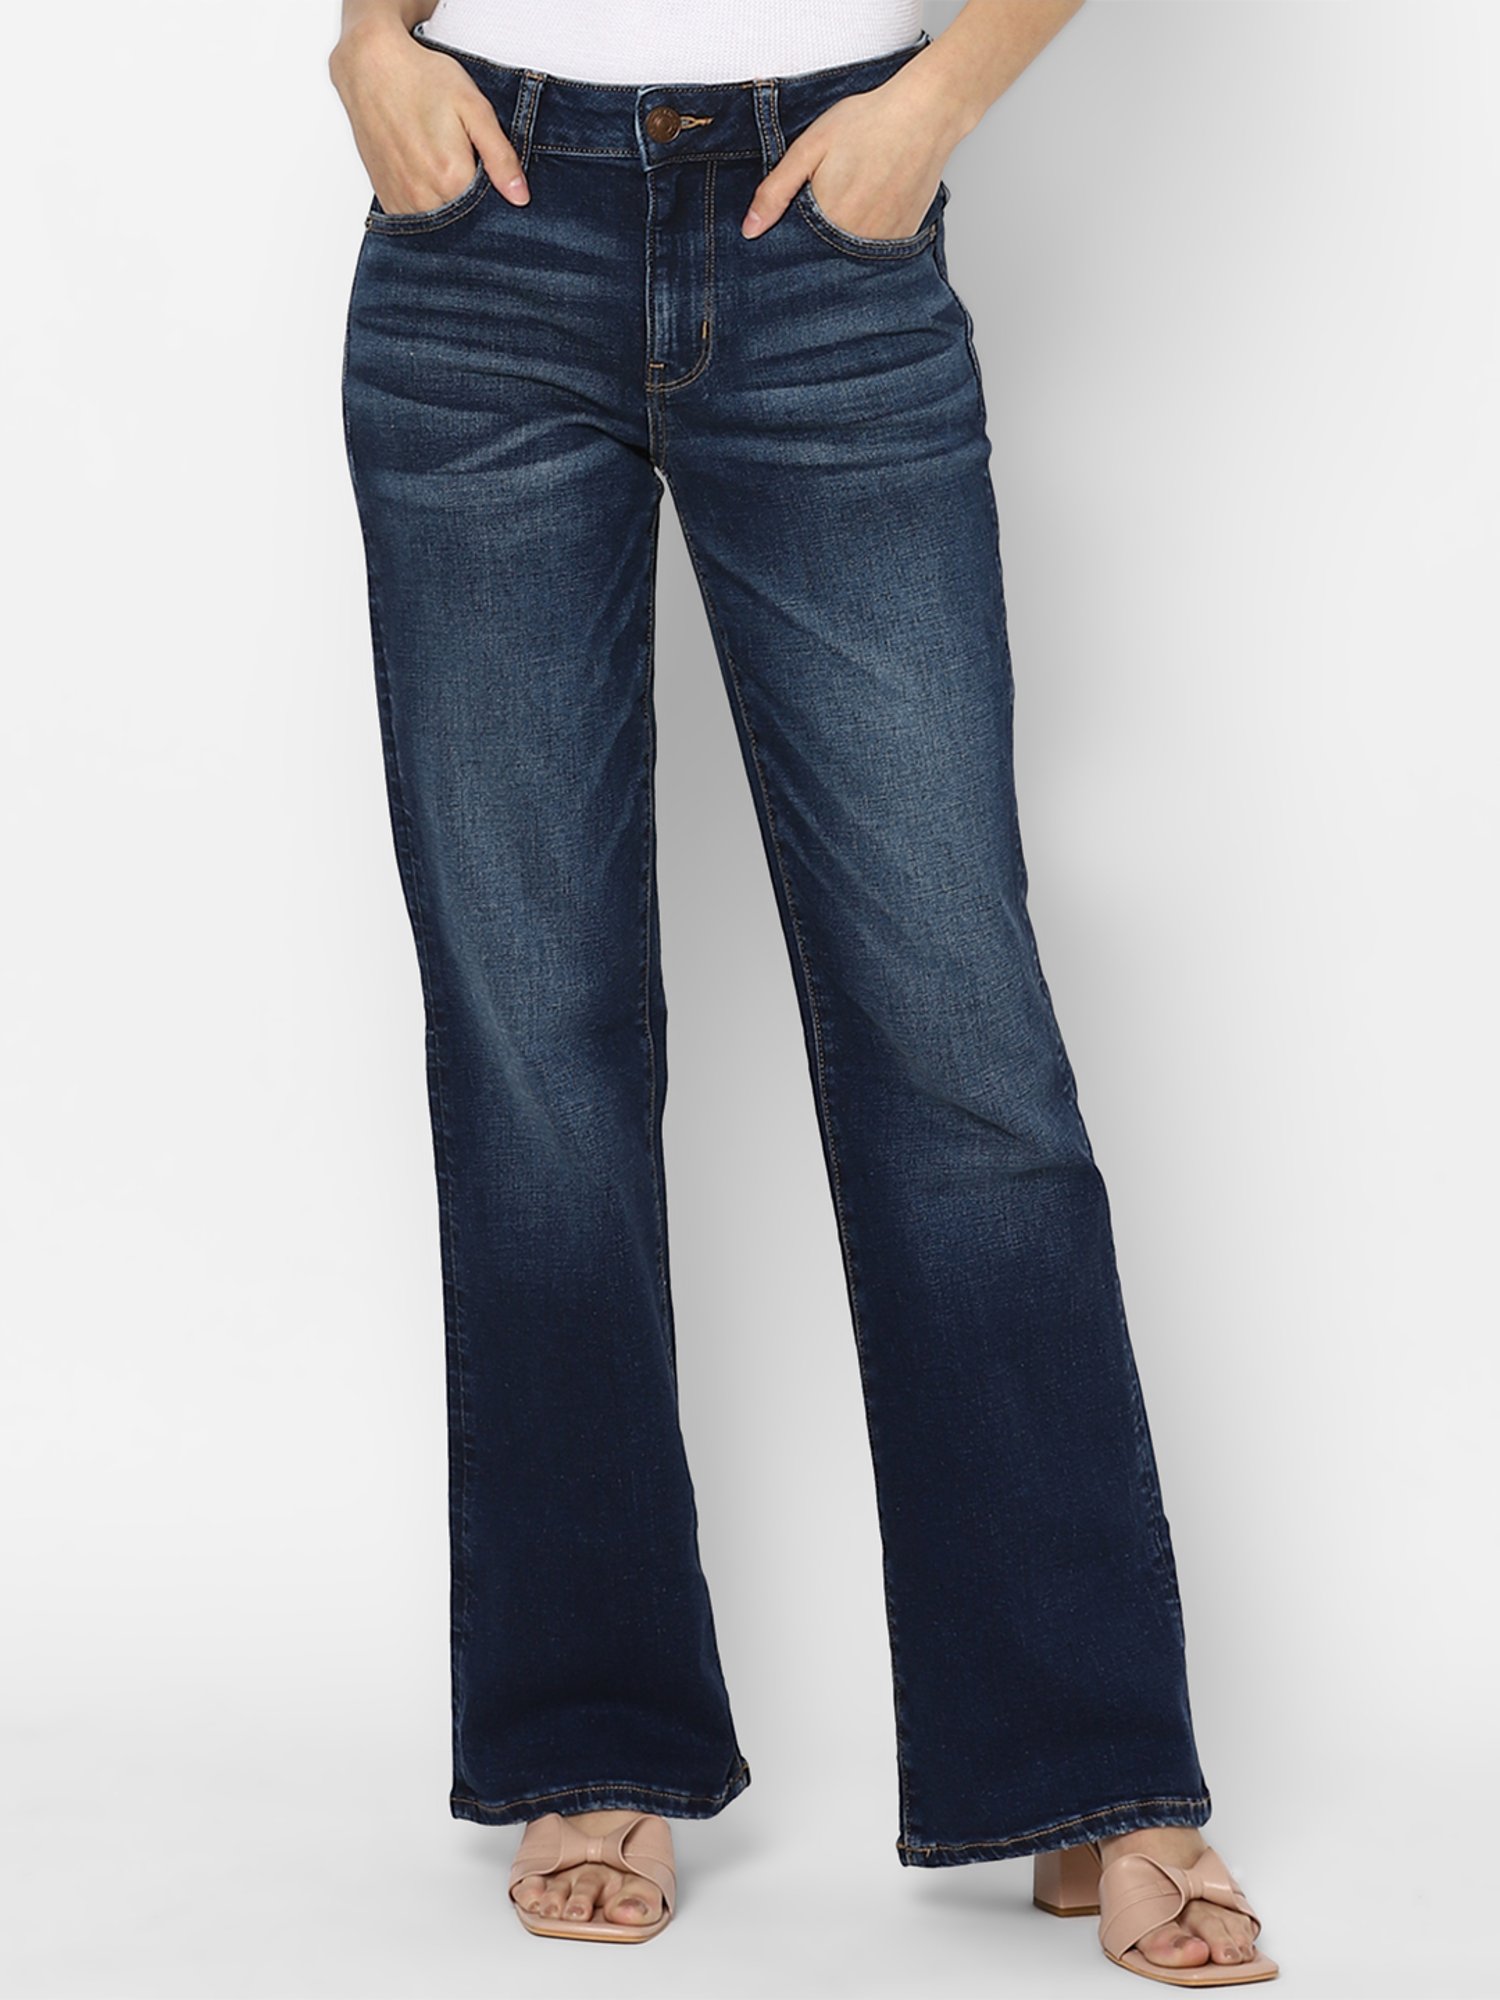 American Eagle Outfitters Blue High Rise Jeans